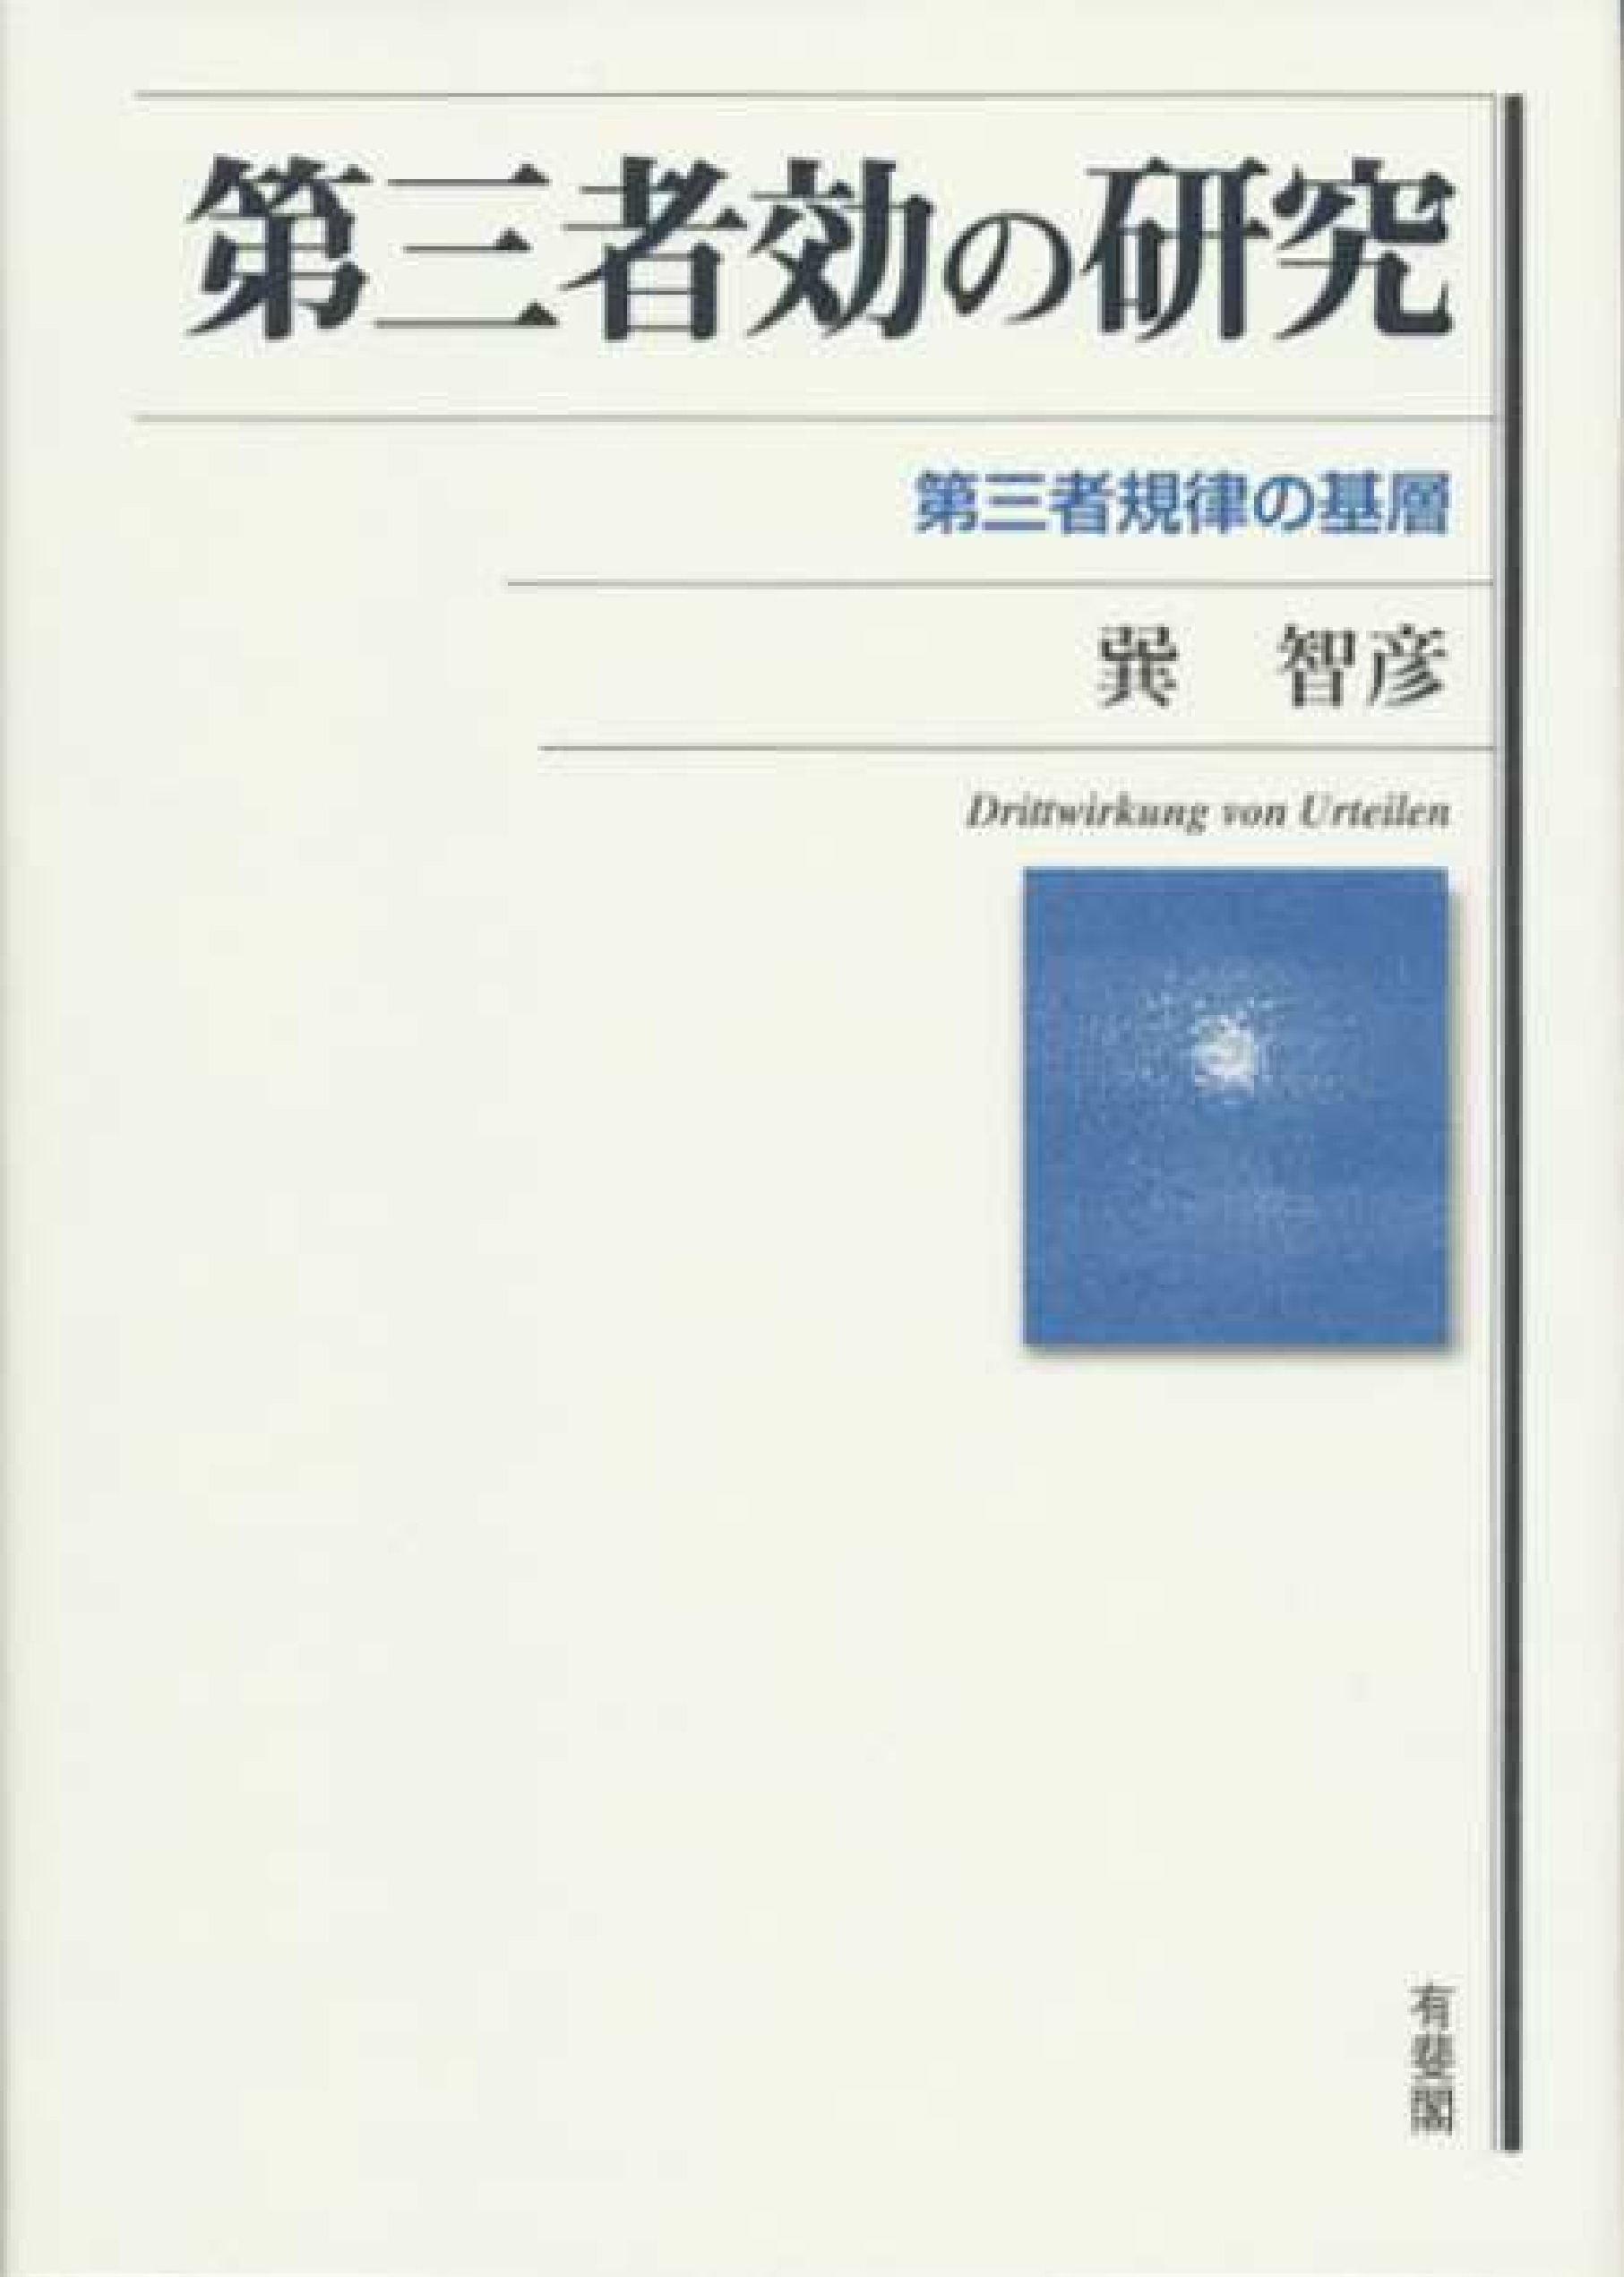 A white and blue cover